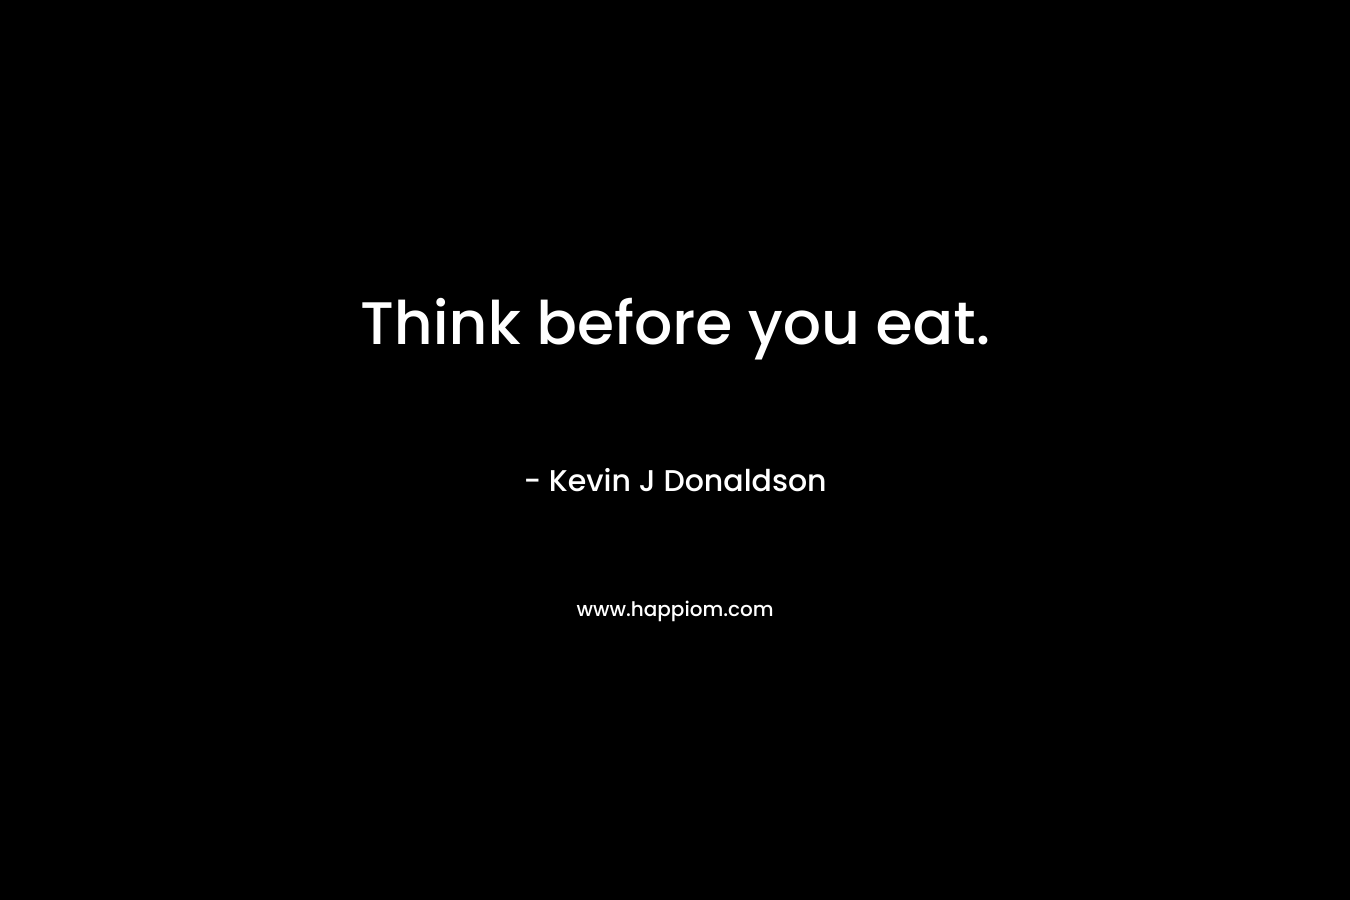 Think before you eat.